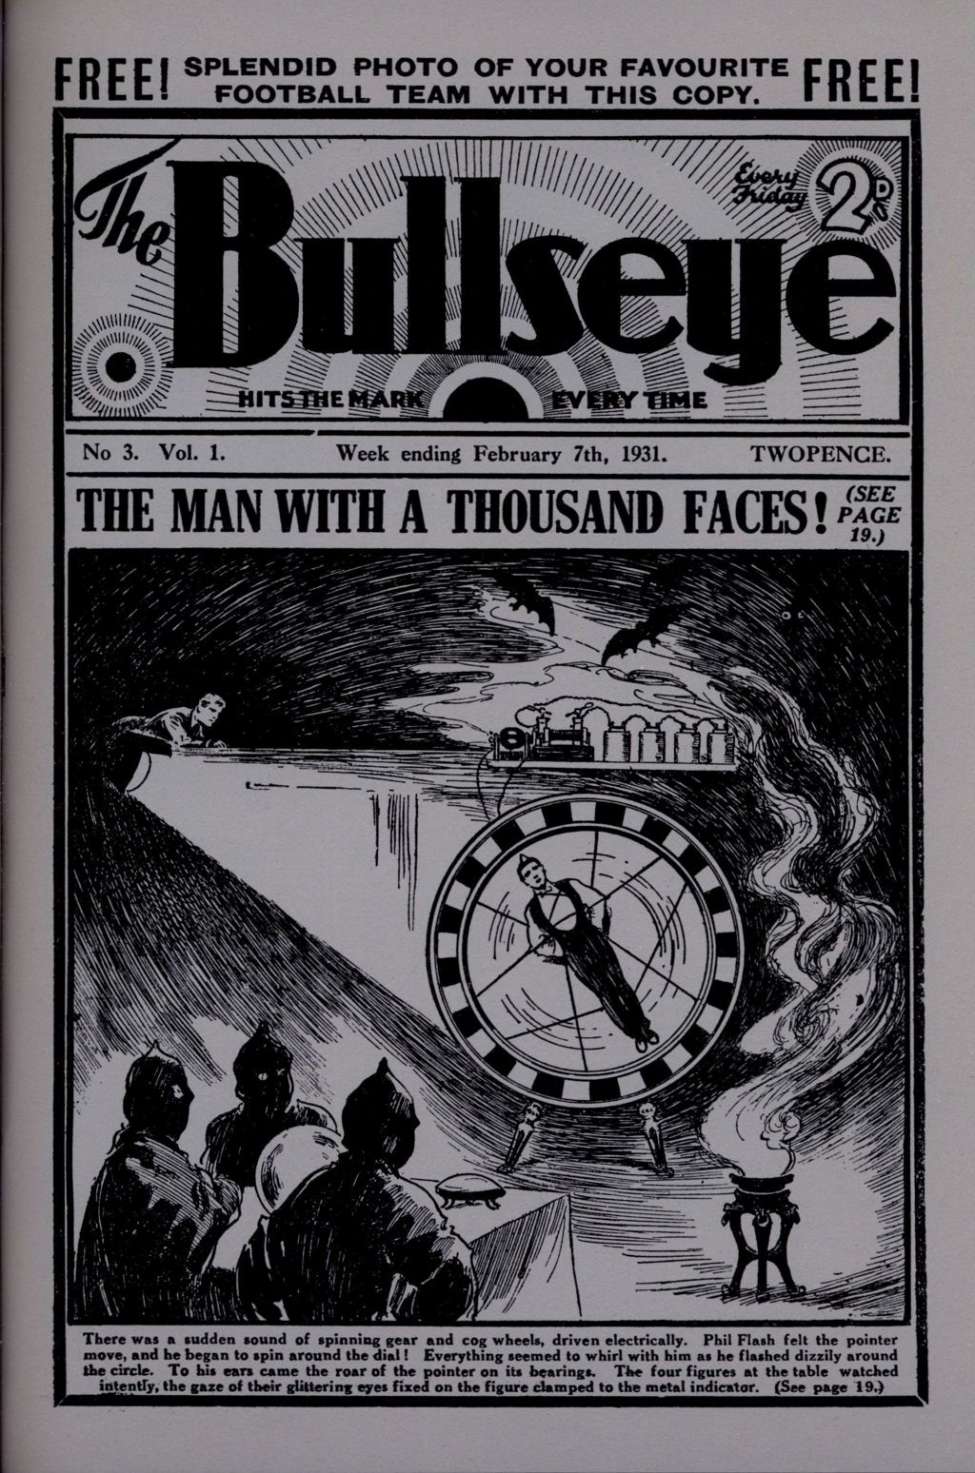 Book Cover For The Bullseye v1 3 - The Man with A Thousand Faces!